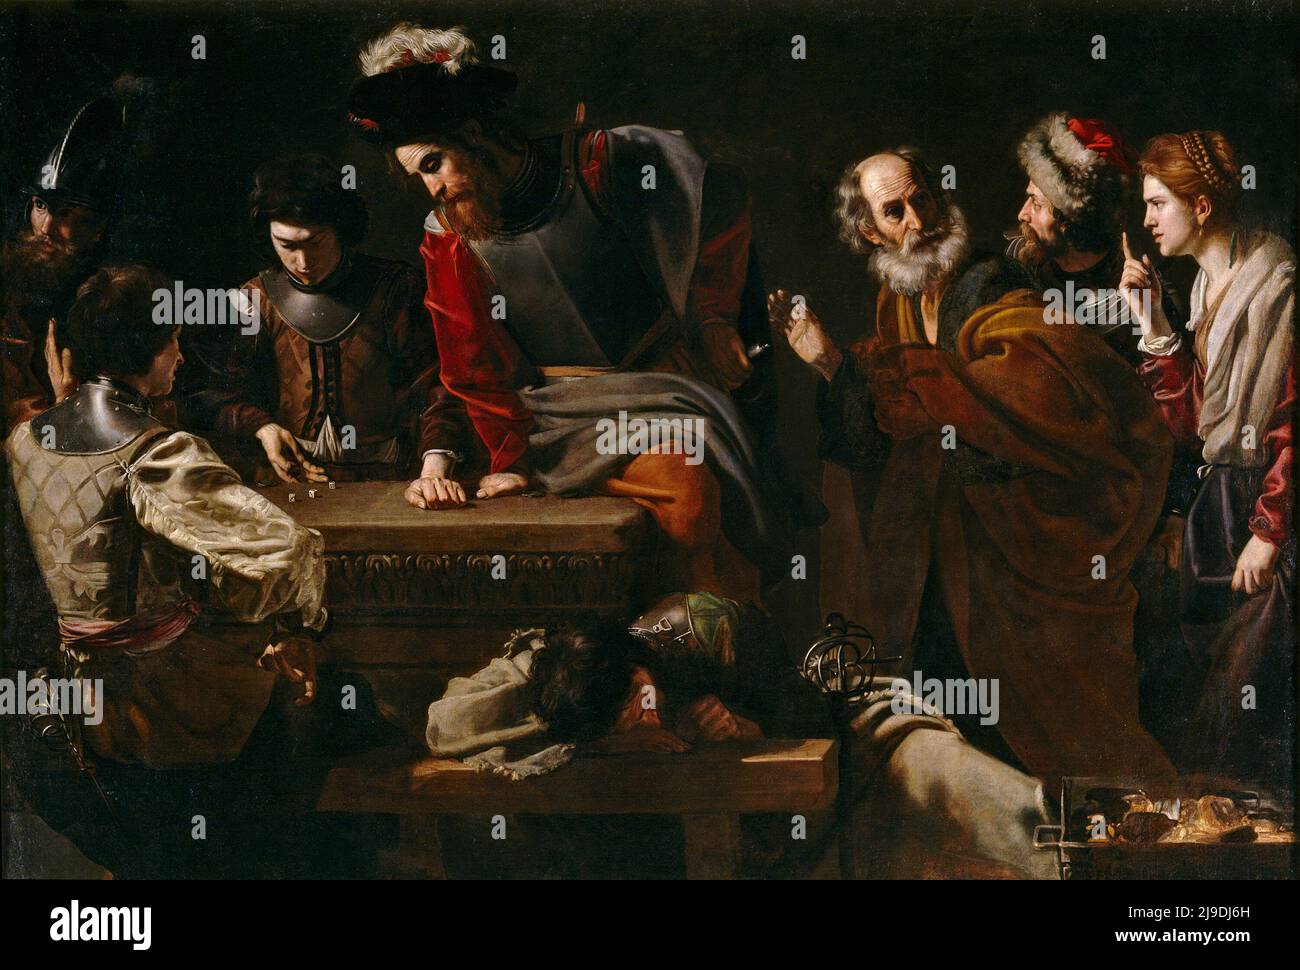 The Denial of St Peter painted by Nicolas Tournier,. This painting depicts the scene where, after the arrest of Jesus, St Peter denies knowing him when being confonted by the by the authorities. Stock Photo